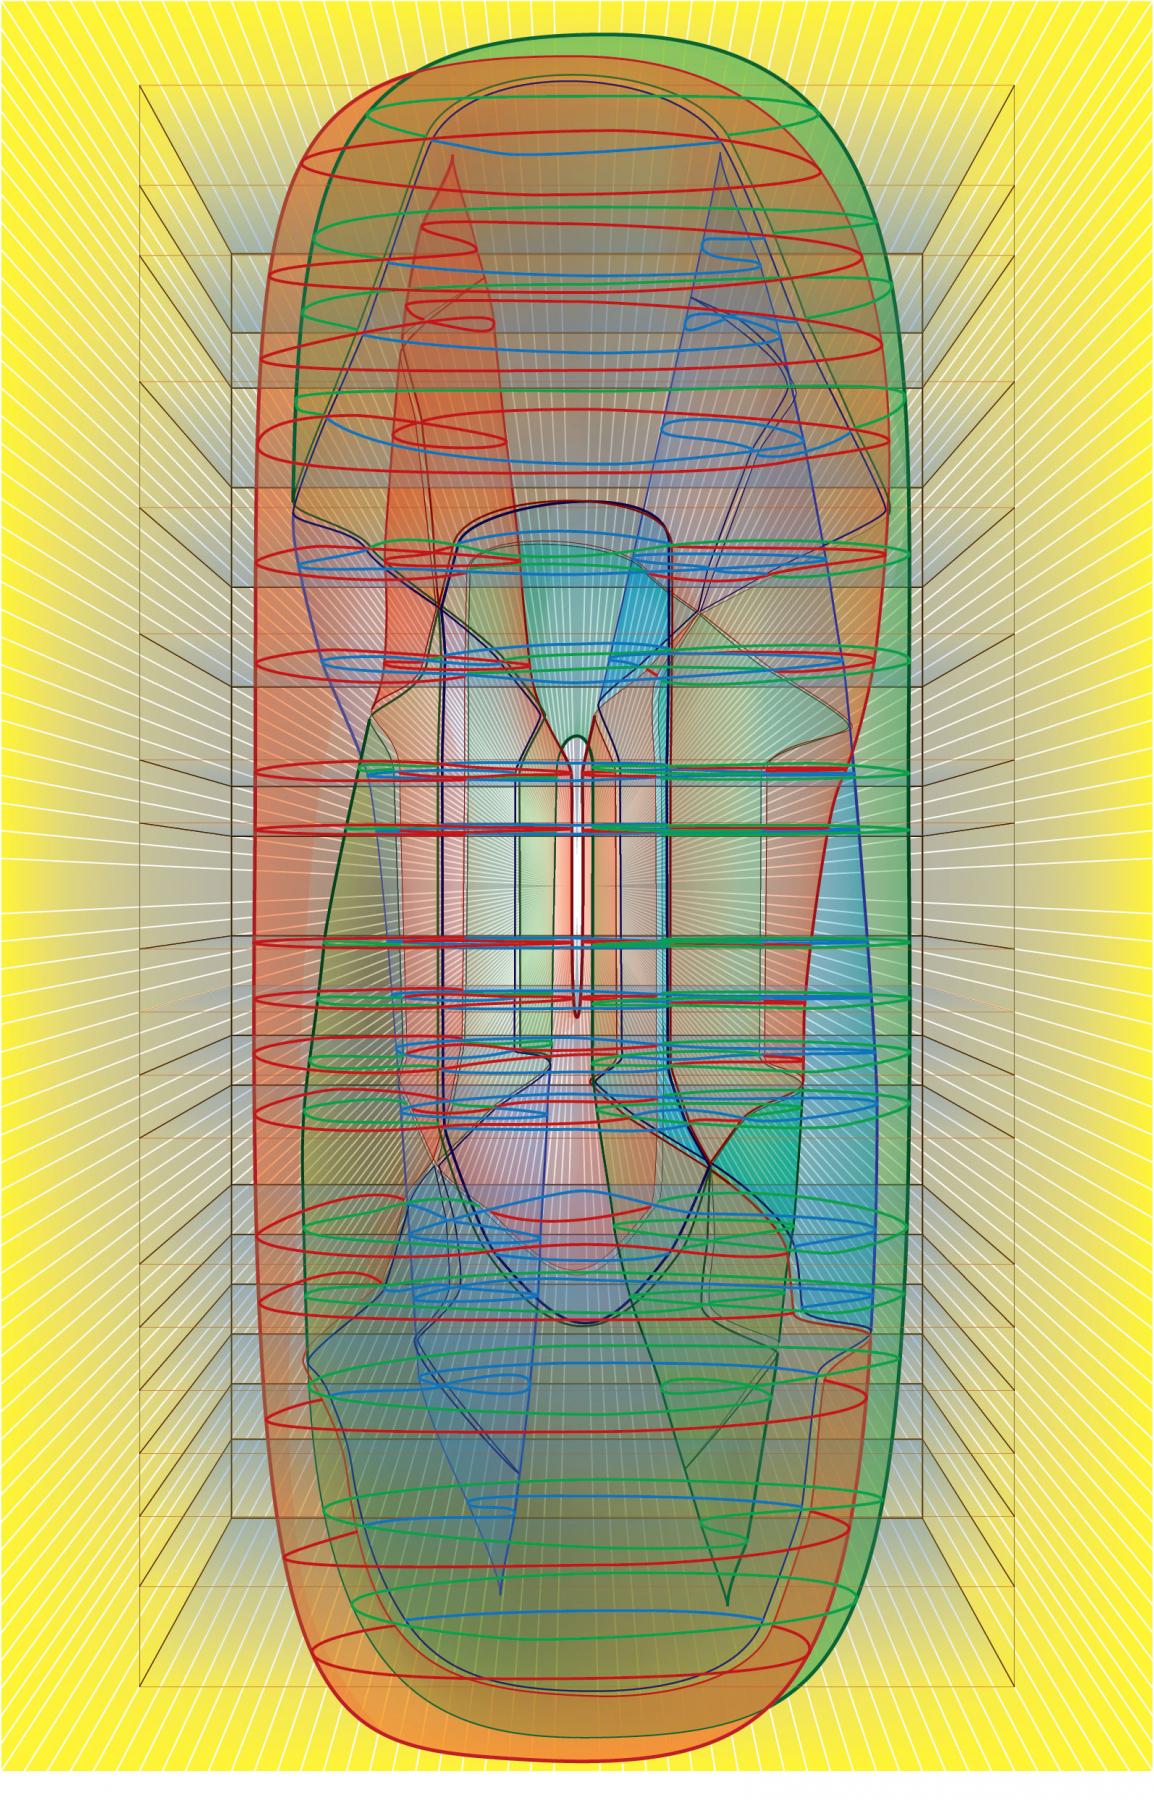 Image for entry 'A window on the 2-twist spun trefoil'